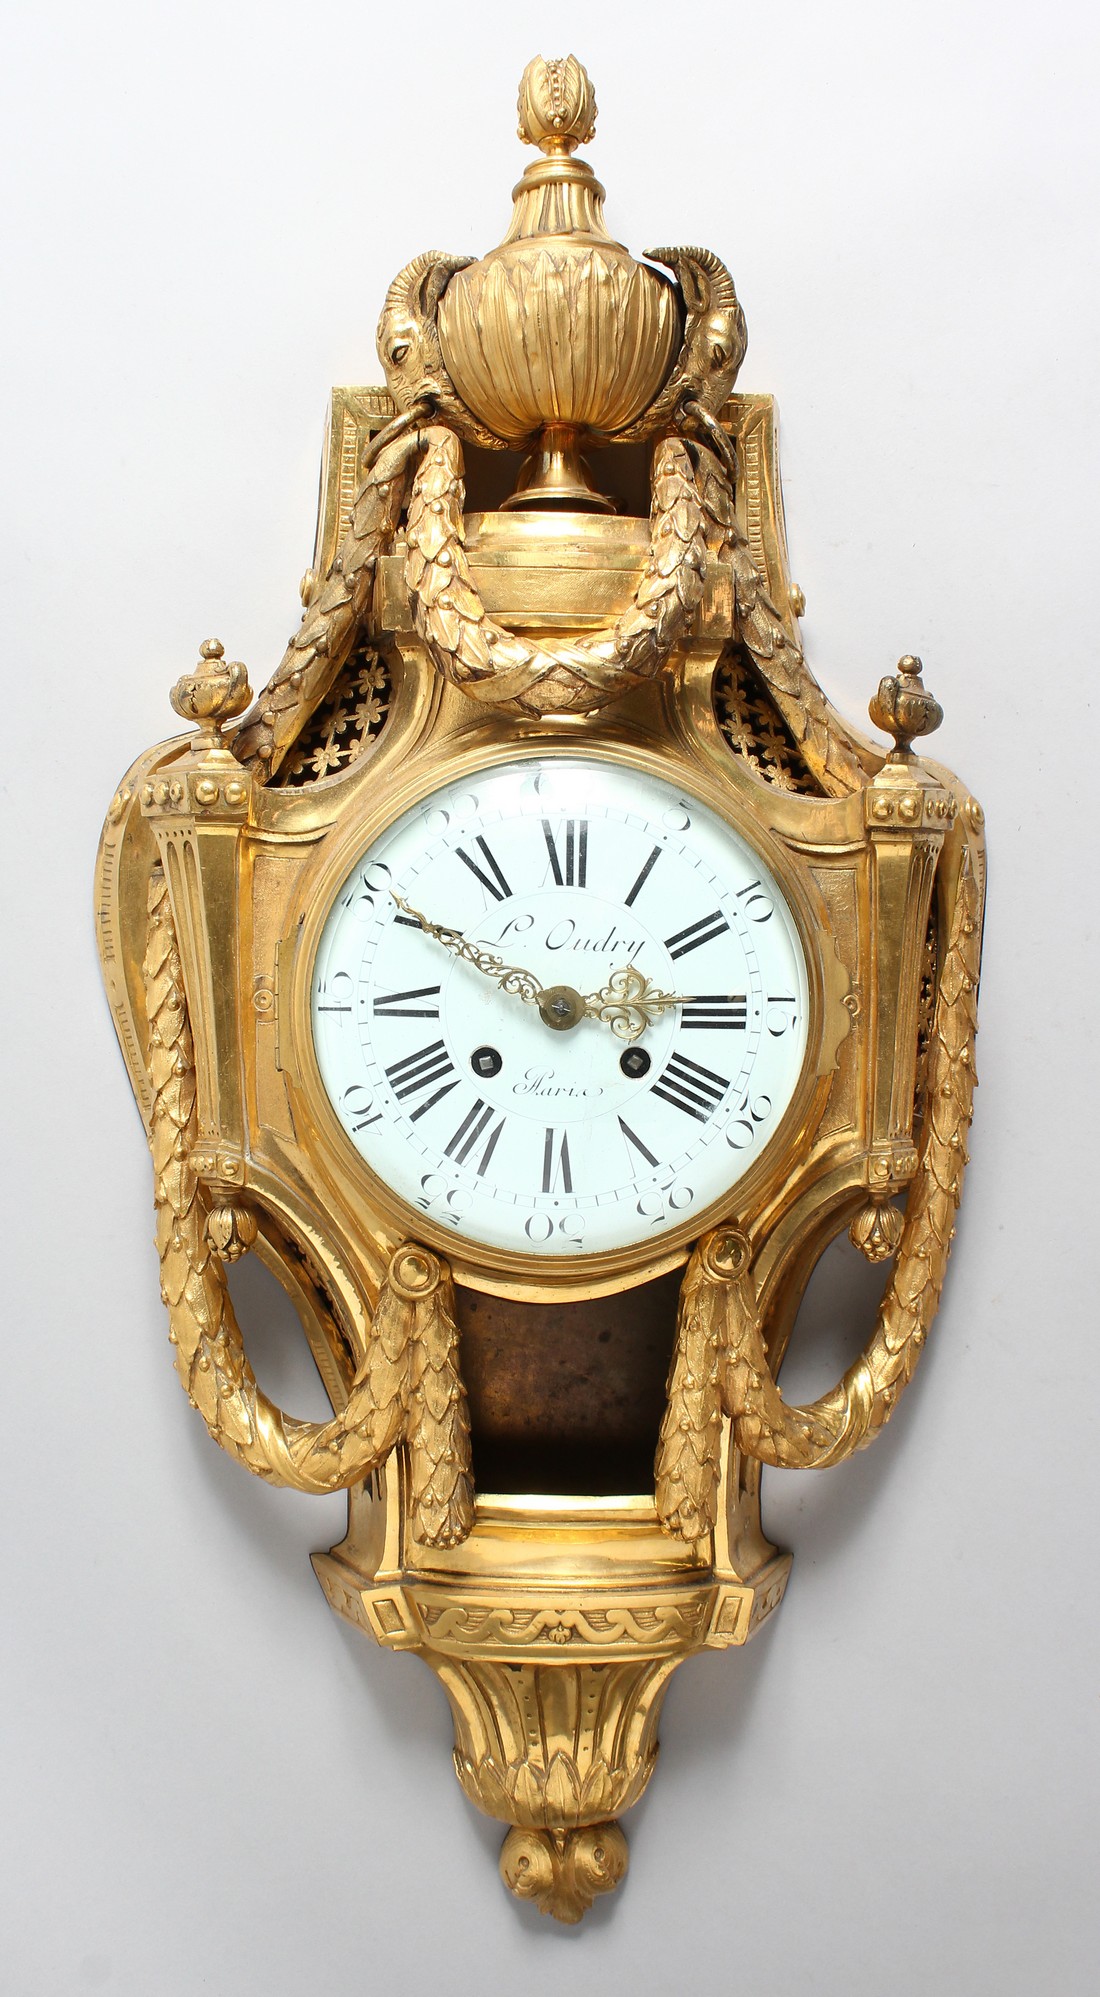 A 19TH CENTURY FRENCH ORMOLU CARTEL CLOCK with eight day movement, enameled dial with Roman numerals